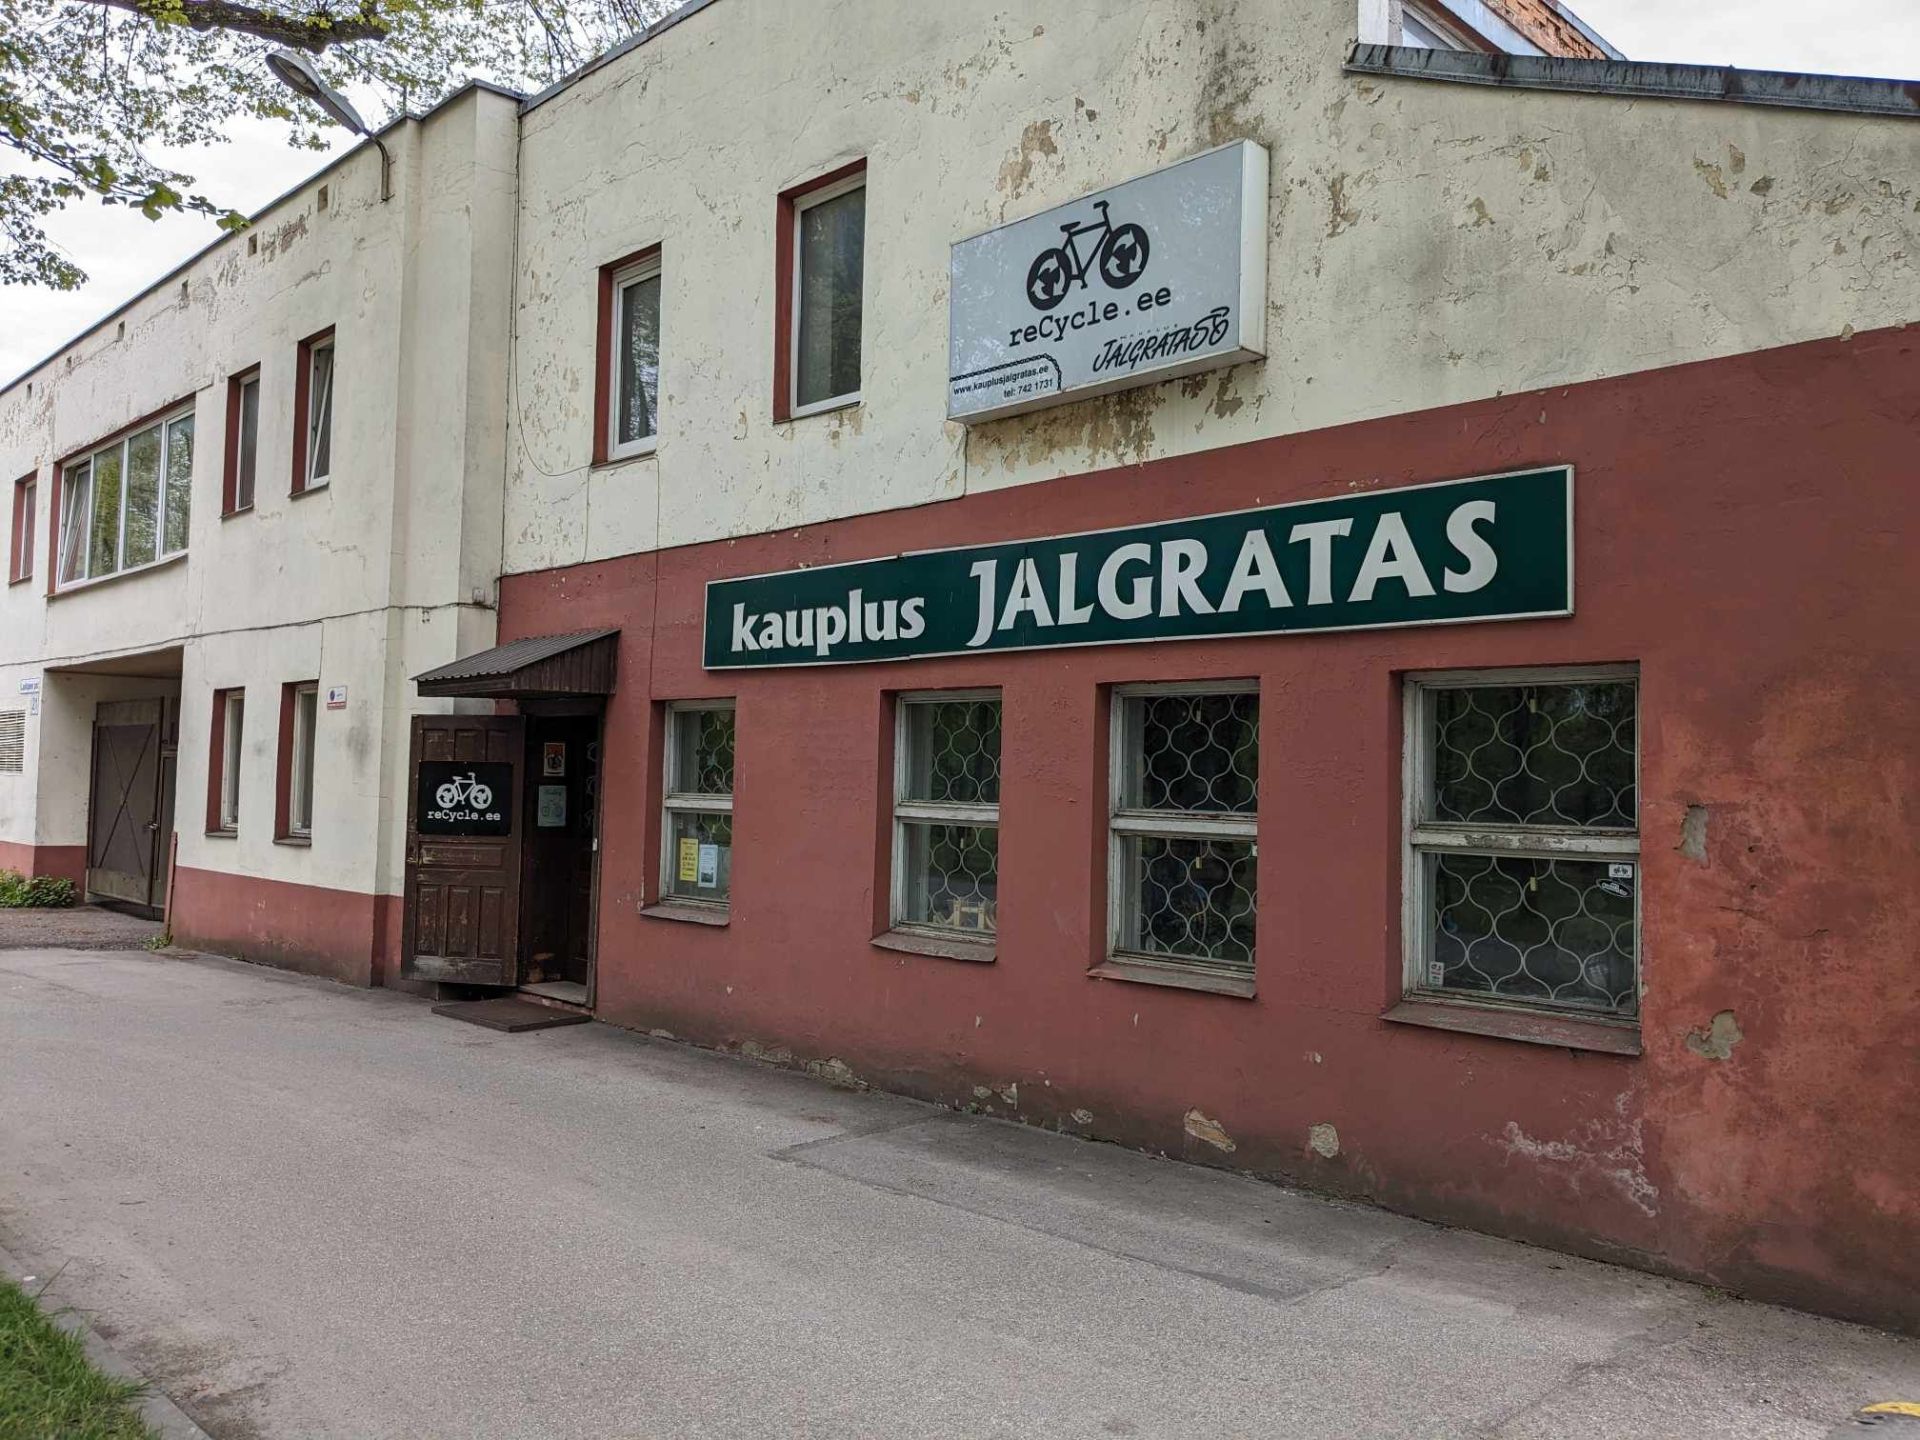 Tartu Bicycle Shop New and Used Bicycles, Bicycle Rental, Bicycle Repairs and Maintenance, Ice Skate Sharpening, Bicycle Parts and Accessories, Transport for Maintenance